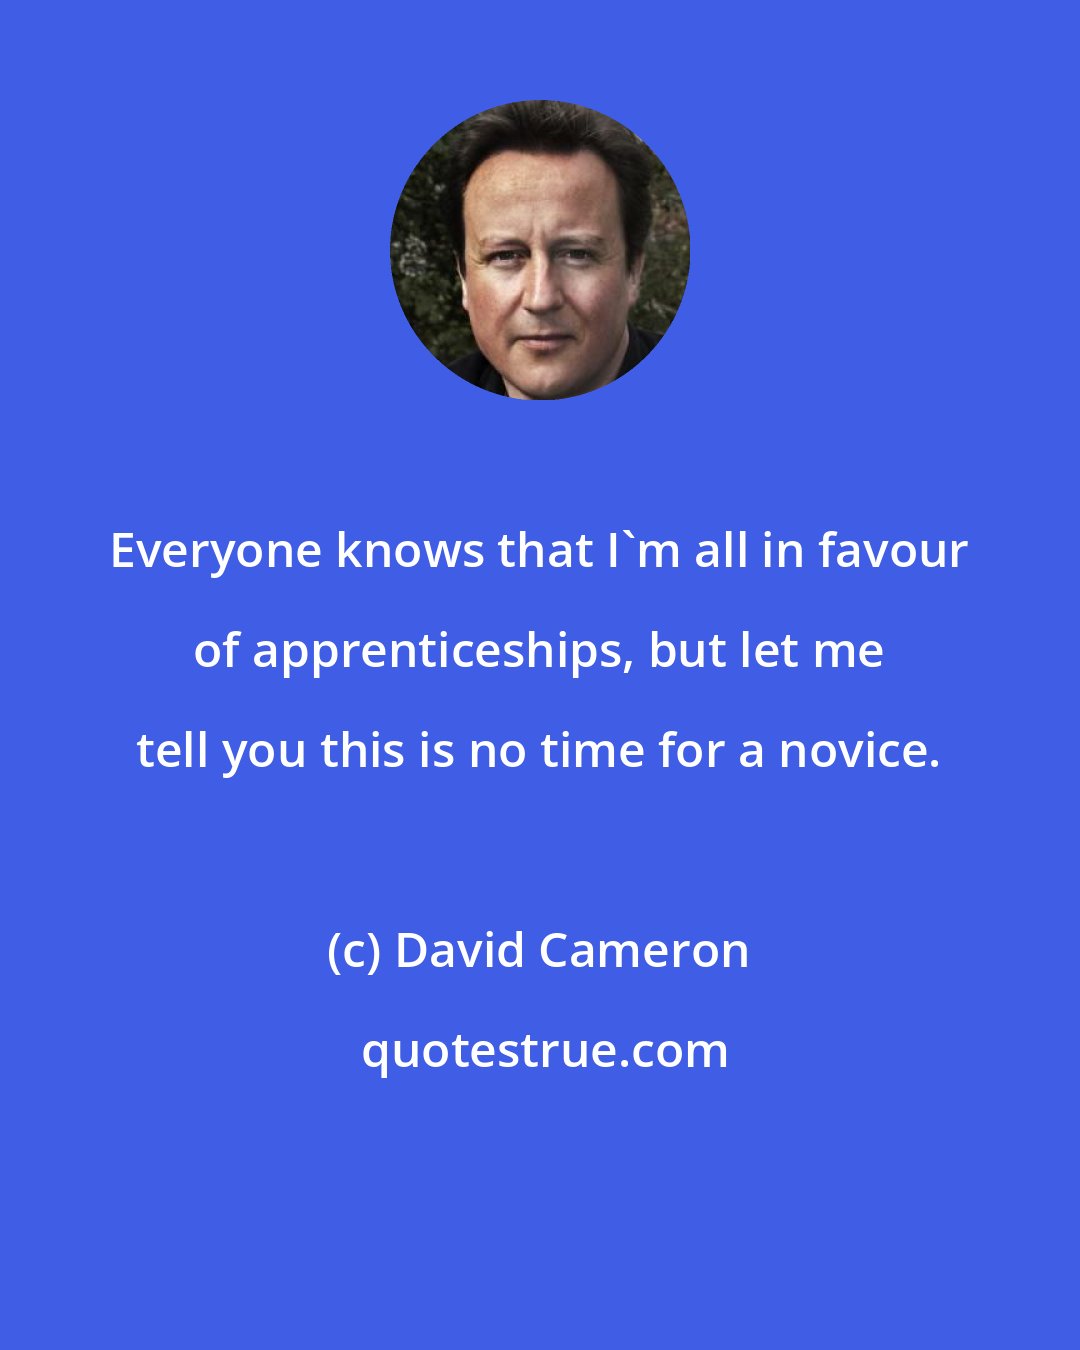 David Cameron: Everyone knows that I'm all in favour of apprenticeships, but let me tell you this is no time for a novice.